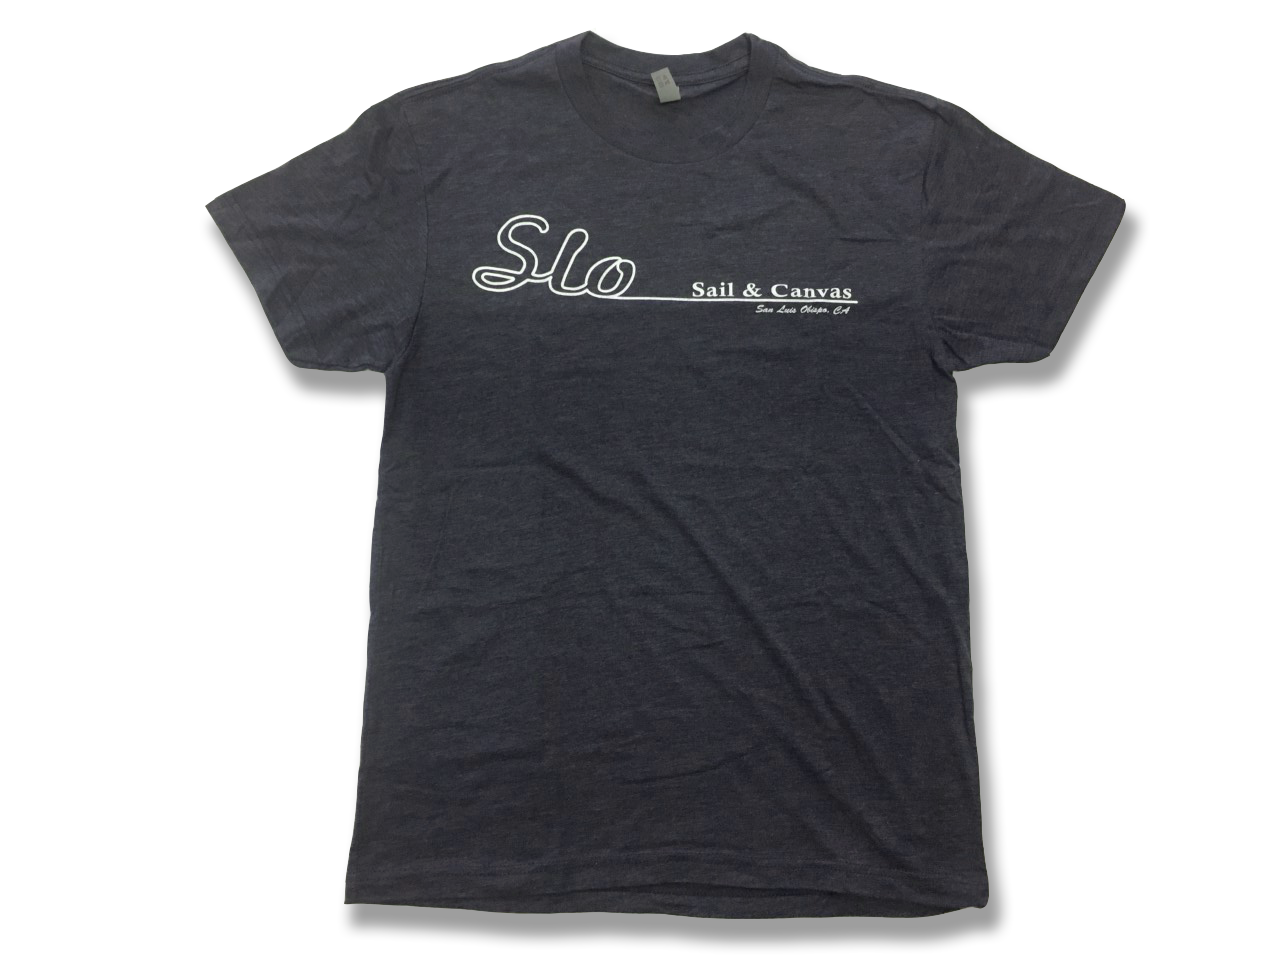 SLO Sail and Canvas T Shirt. Great to give to a sailor as a gift - or treat yourself to a comfortable lightweight T shirt! Shown in Vintage Navy.